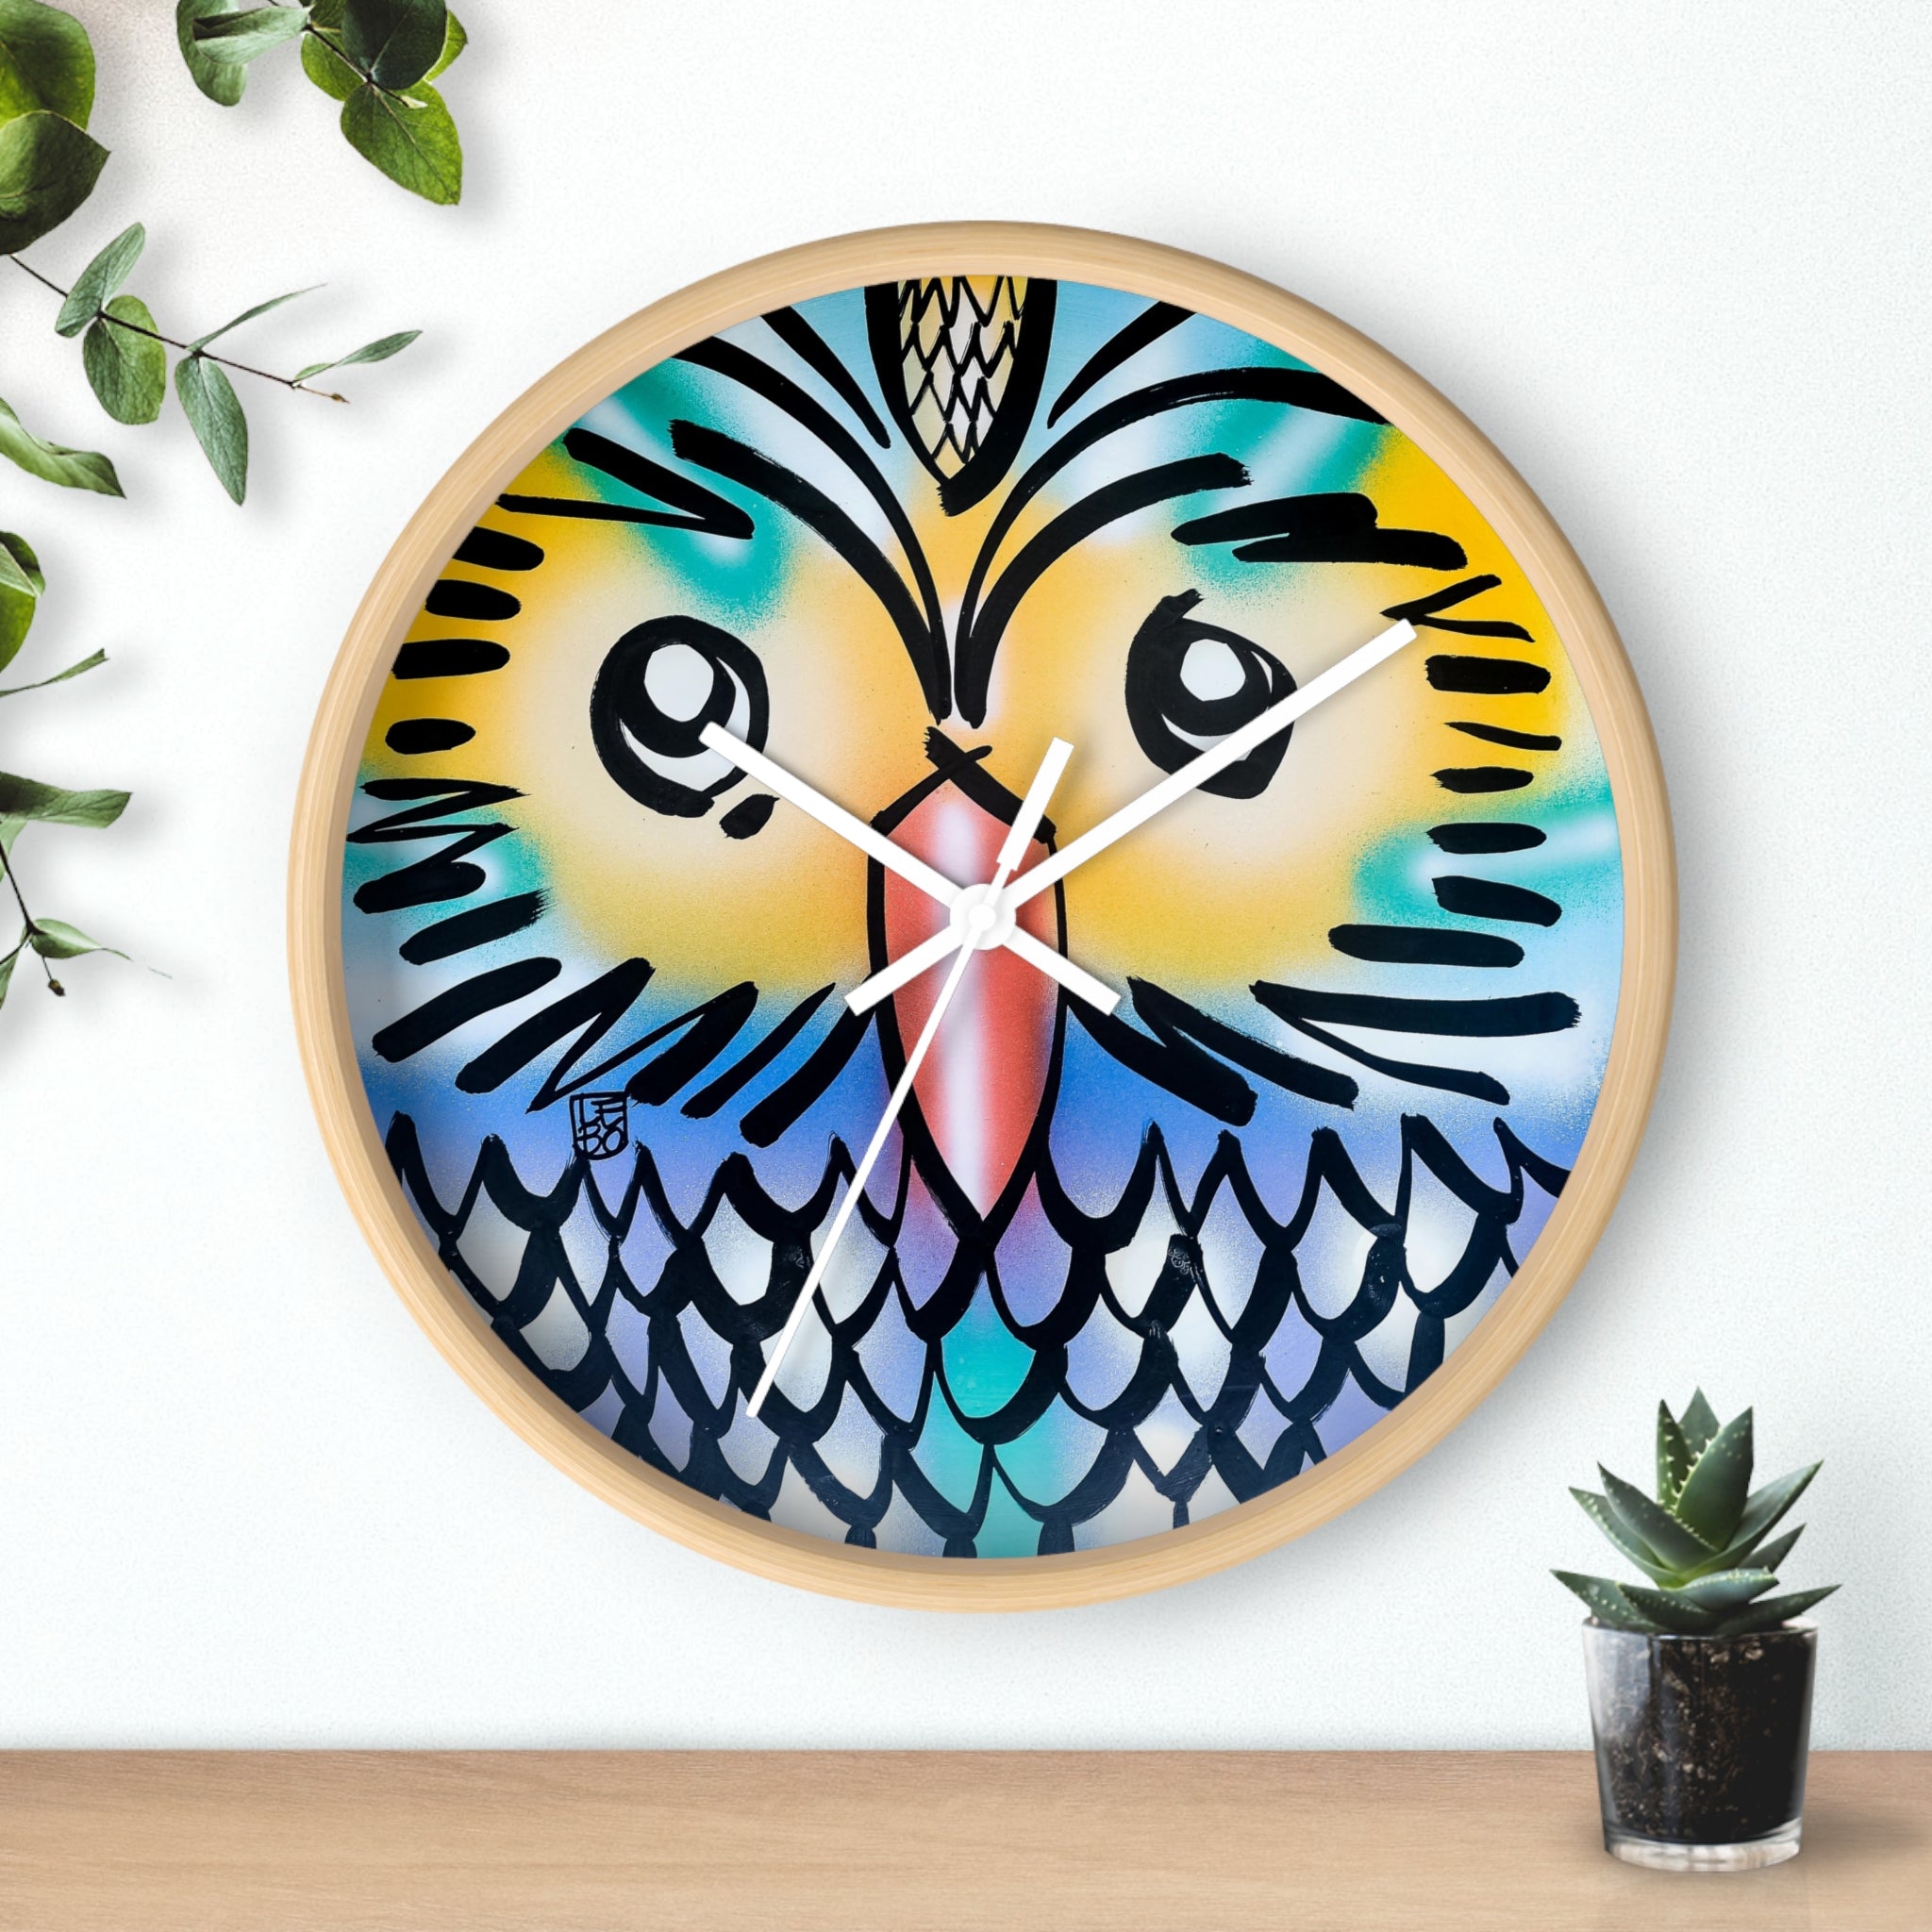 Keep Your Eyes on the Stars – Lebo Wall clock